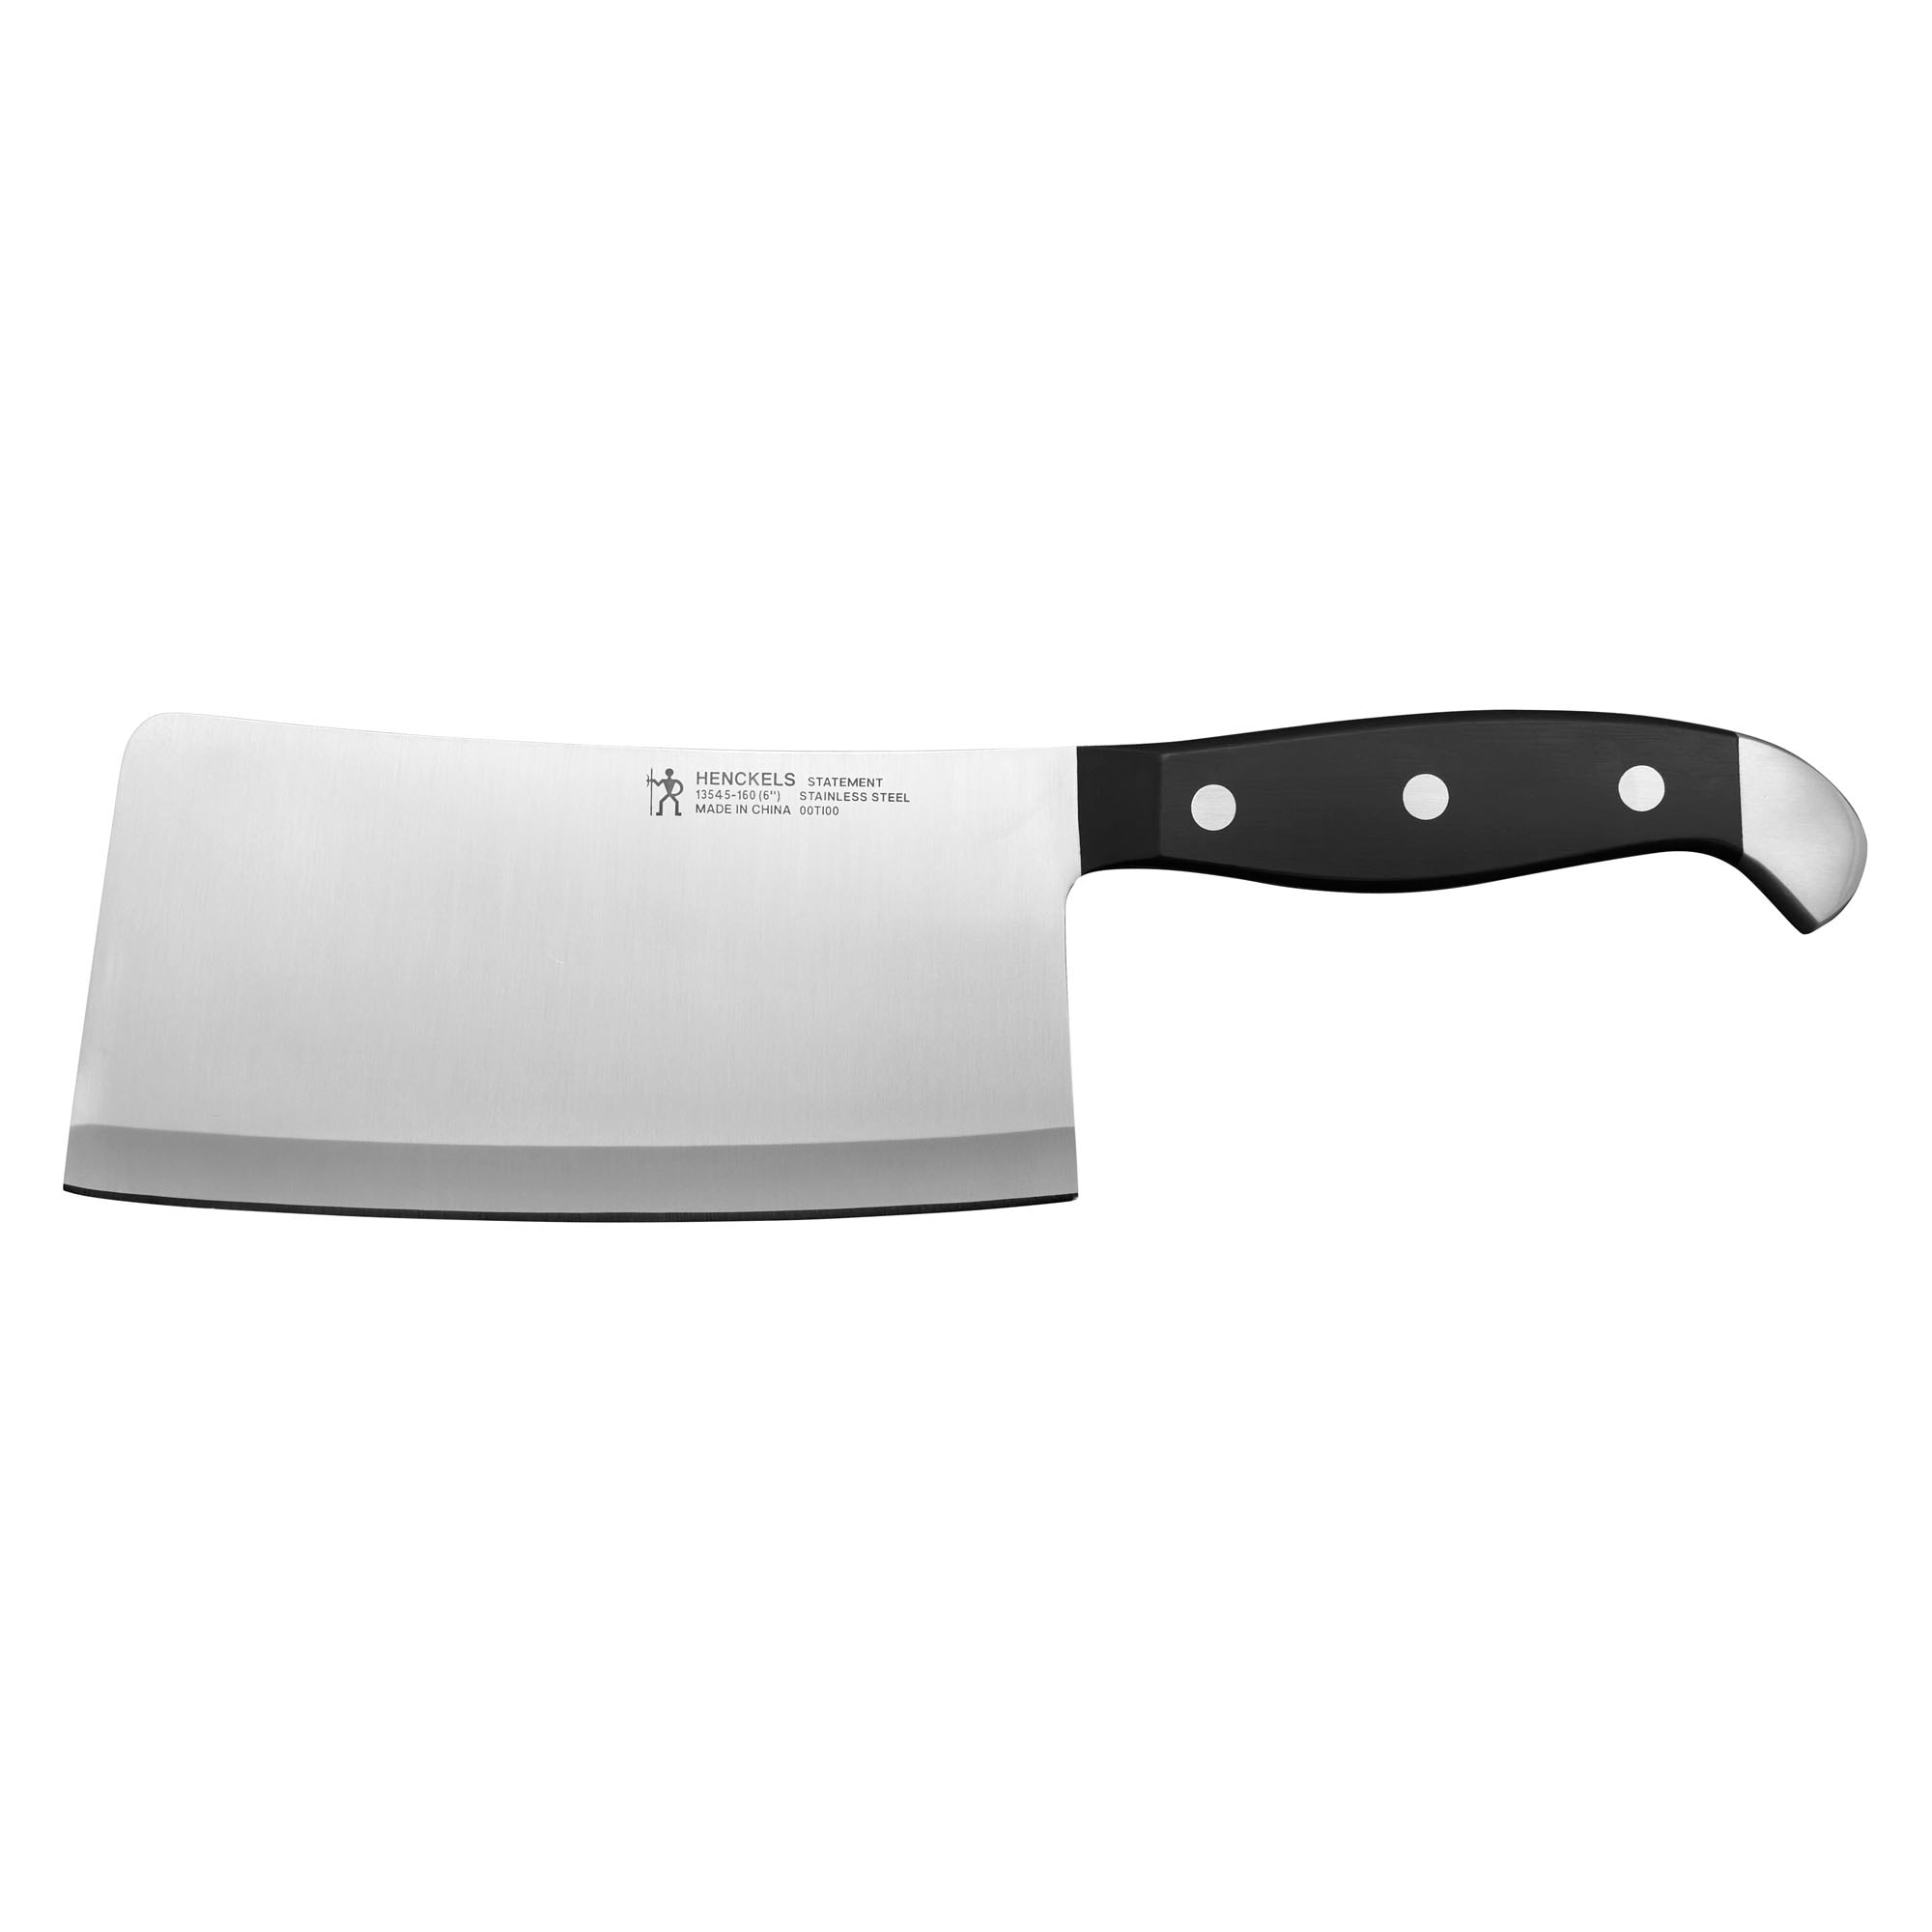 https://ak1.ostkcdn.com/images/products/is/images/direct/45dd641fcd441c087f289acf2aa74f8094dba002/Henckels-Statement-6-inch-Meat-Cleaver.jpg